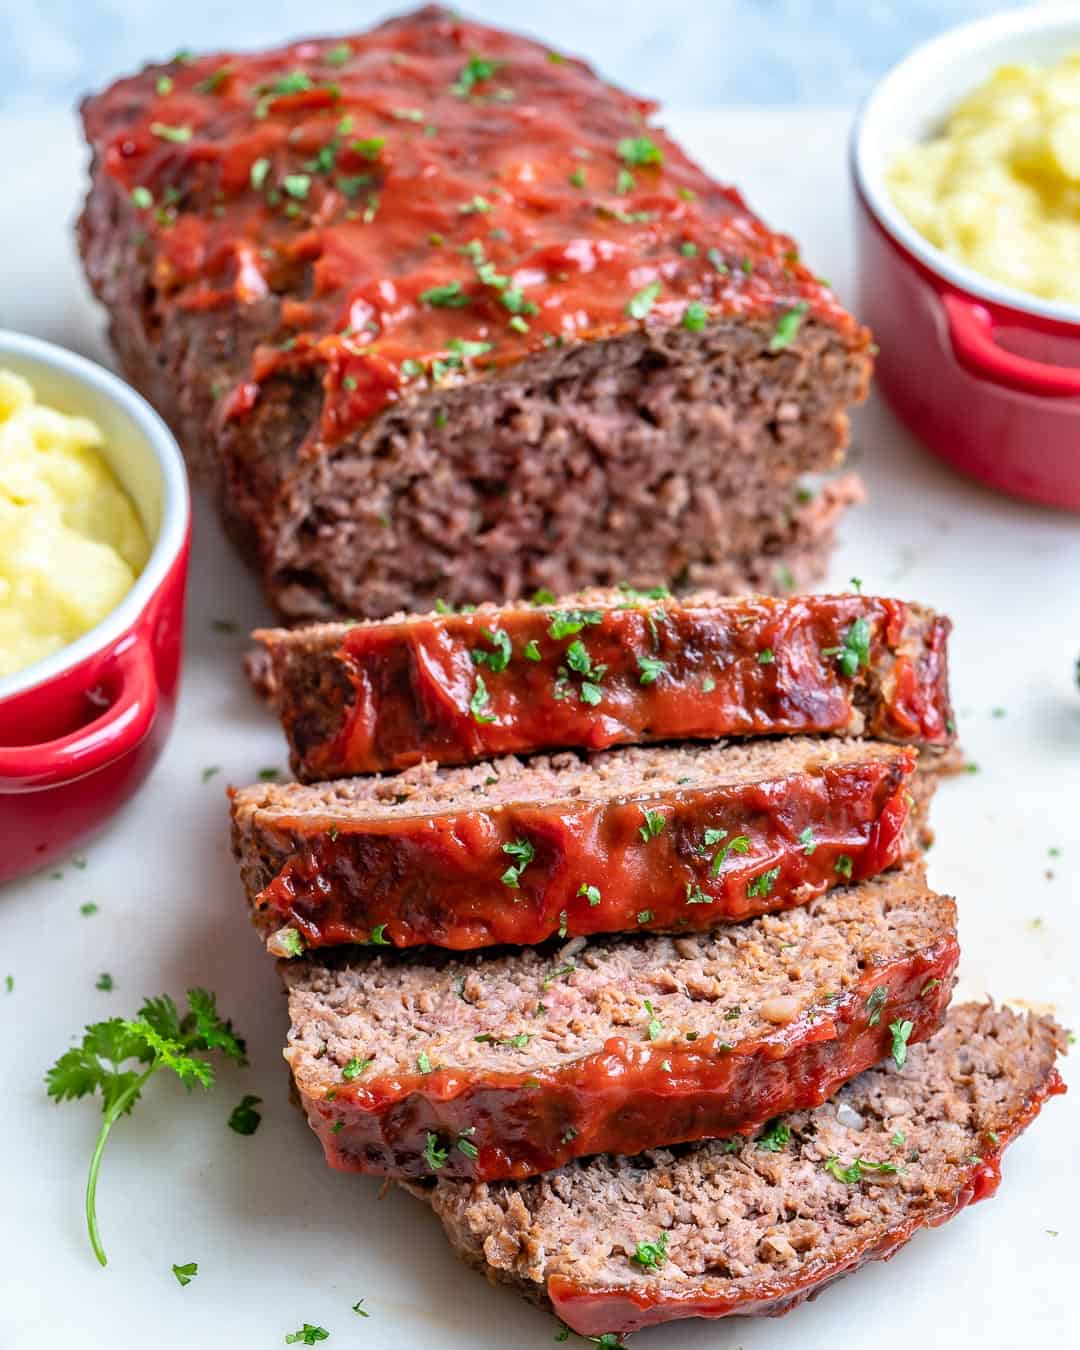 Easy Homemade Meatloaf Recipe Healthy Fitness Meals,Yellow Rice With Corn